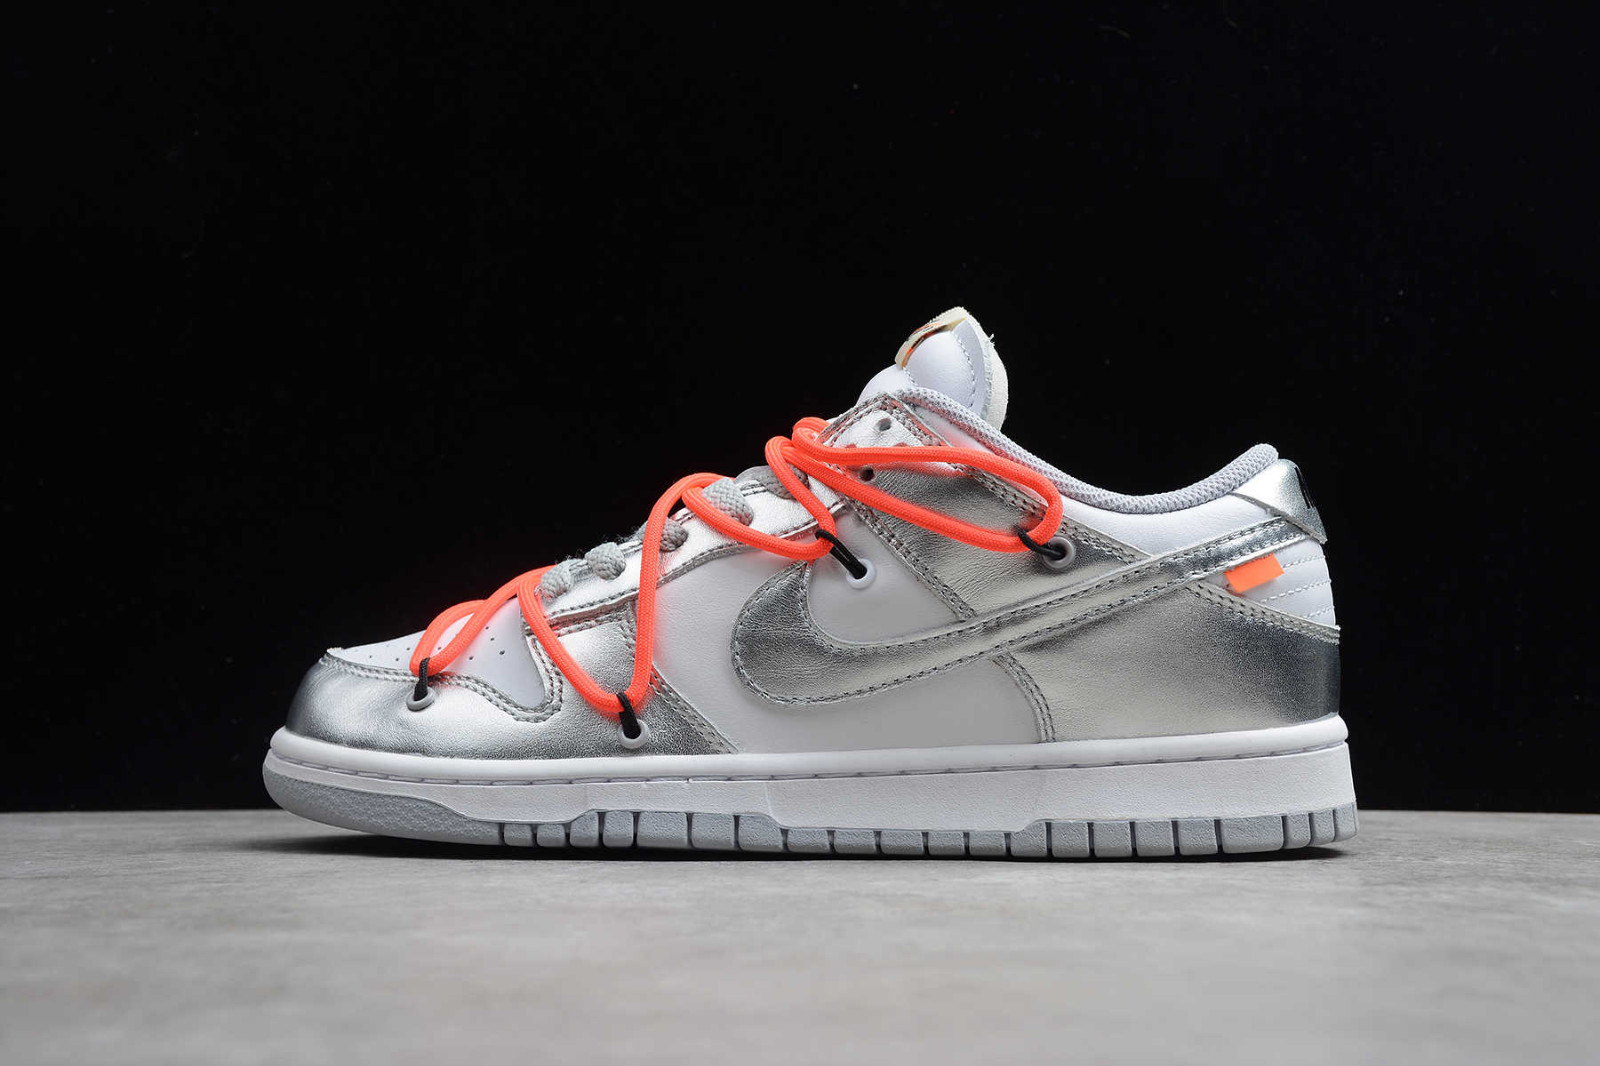 Opmerkelijk Vanaf daar ijs 800 - cheap acg nike running shoes for women boots combat -  MultiscaleconsultingShops - White x acg Nike SB Dunk Low LTHR OW Silver White  Red CT0856 - Off